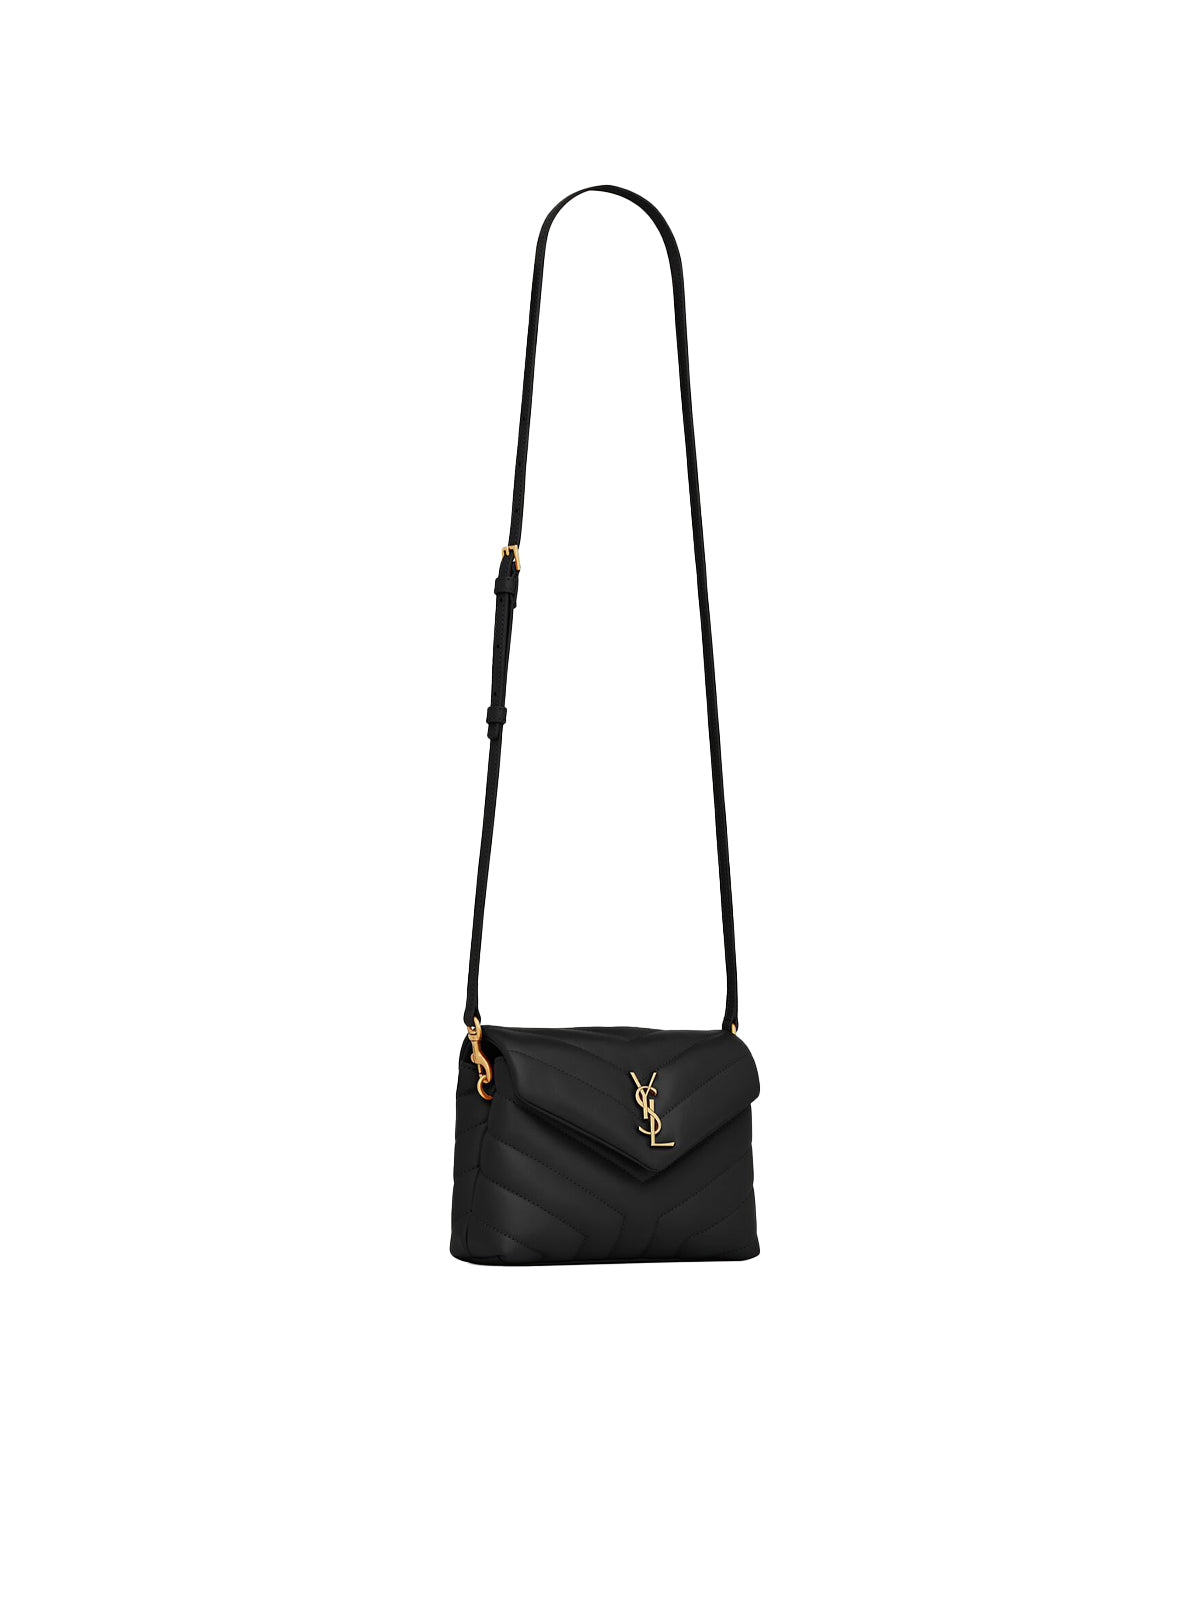 LOULOU TOY BAG IN "Y" QUILTED LEATHER